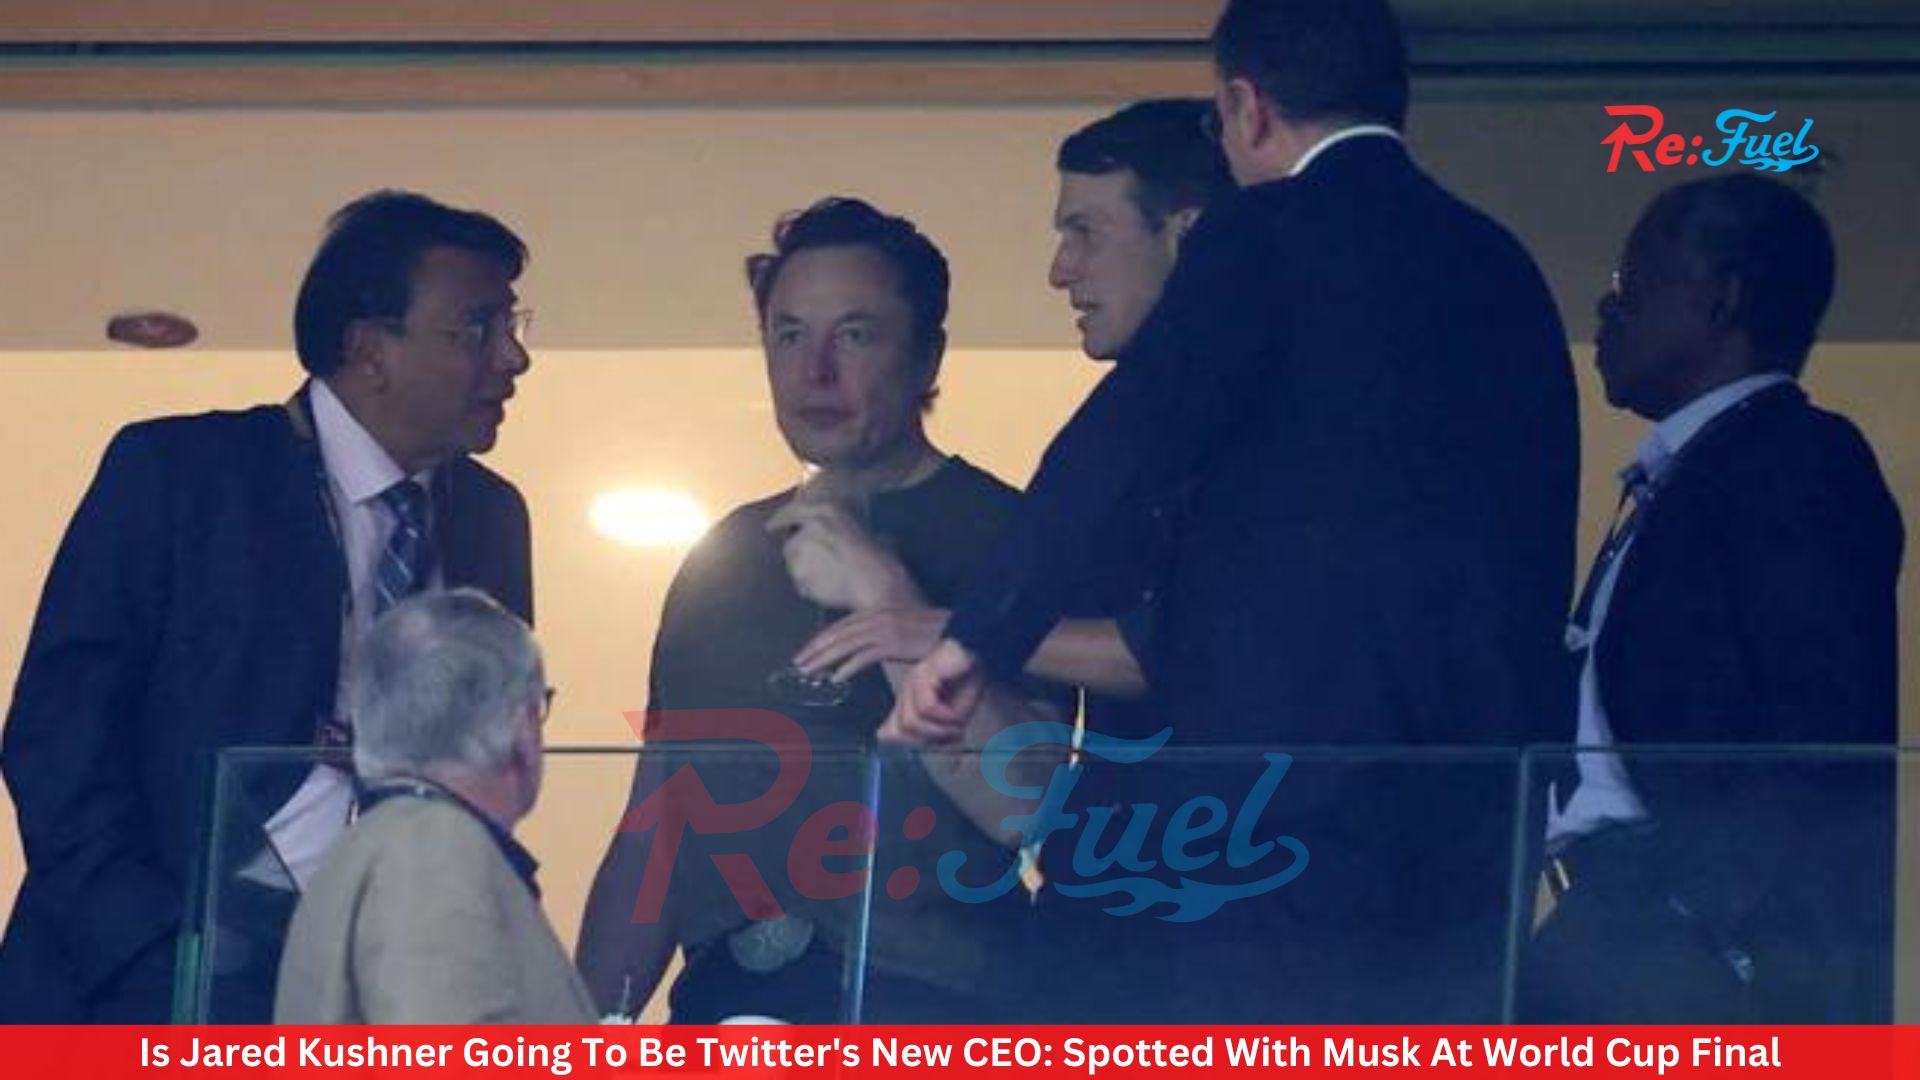 Is Jared Kushner Going To Be Twitter's New CEO: Spotted With Musk At World Cup Final